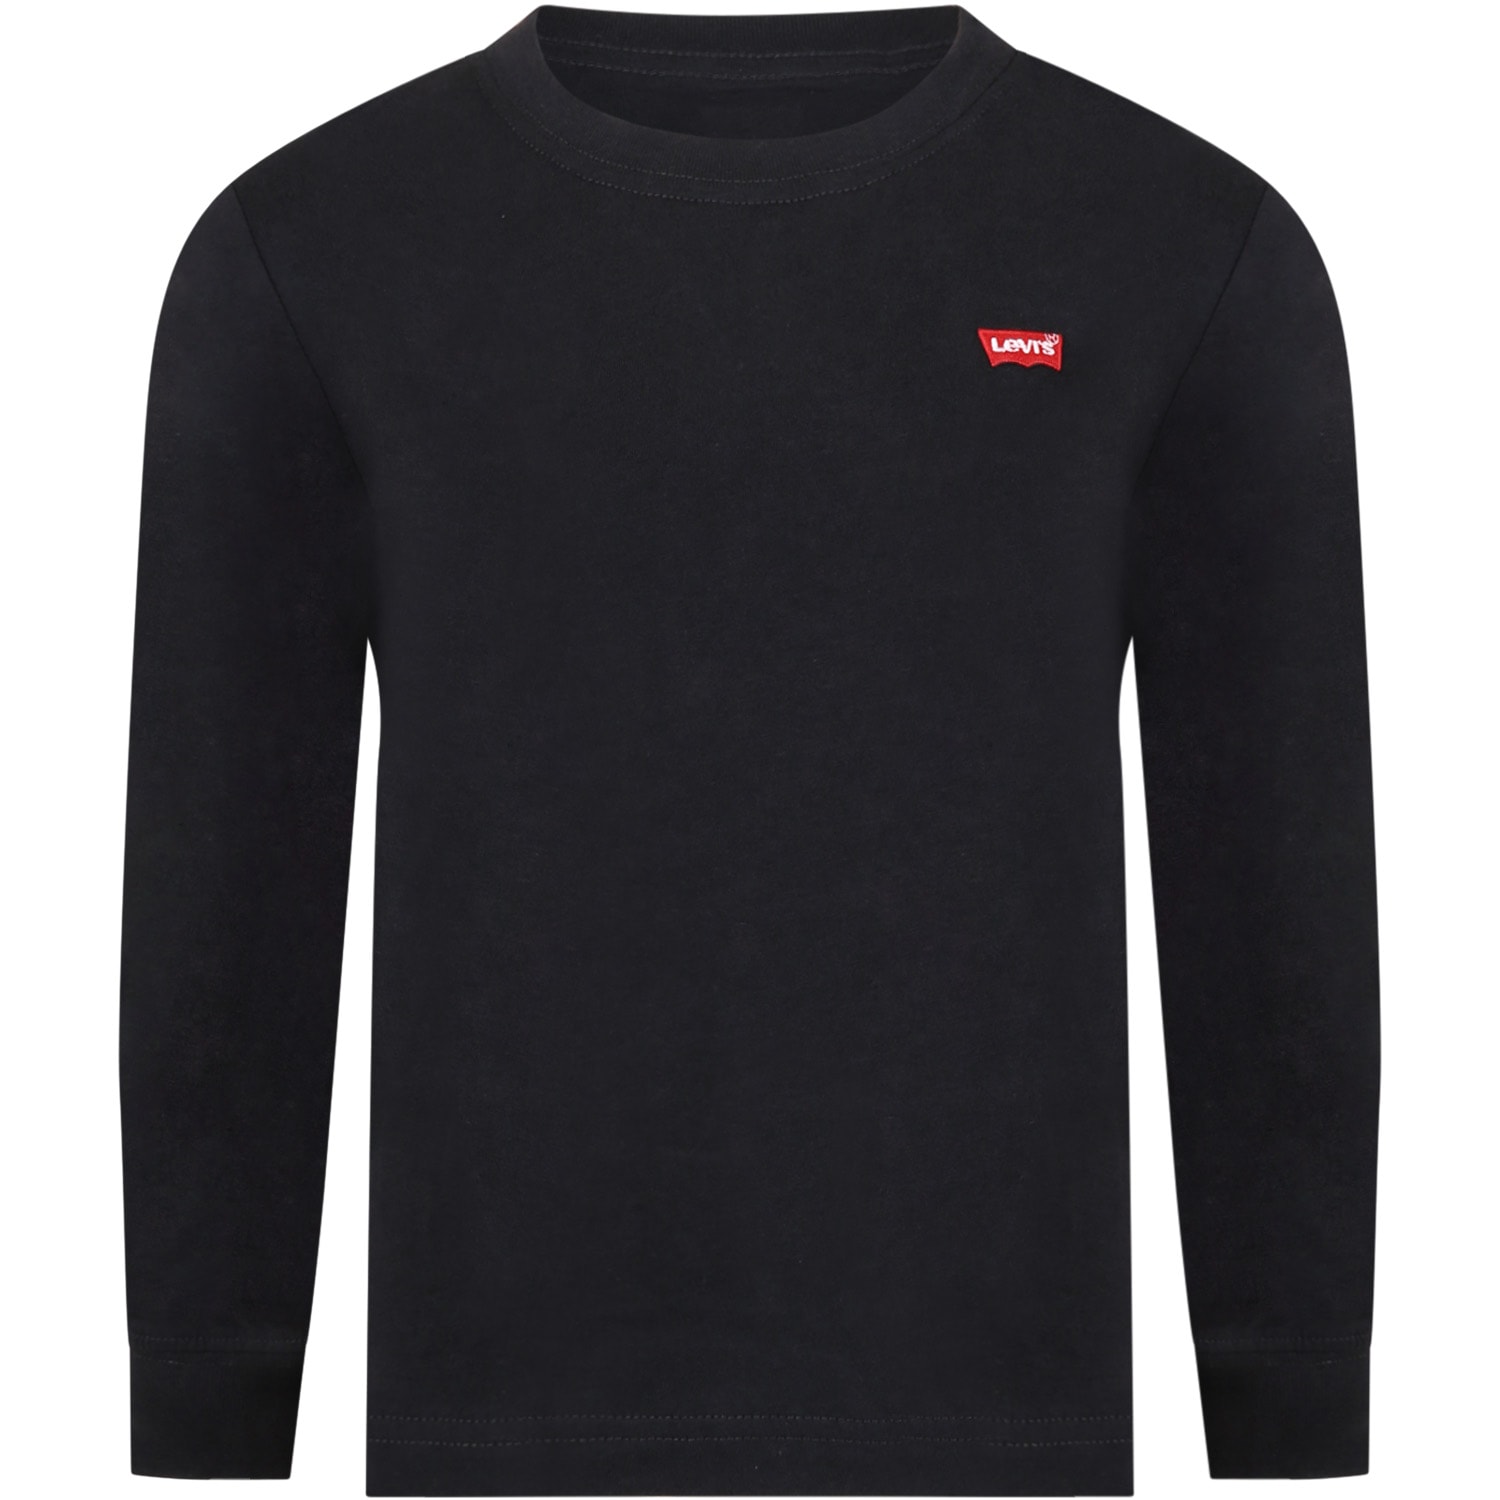 Levis Black T-shirt For Kids With Logo